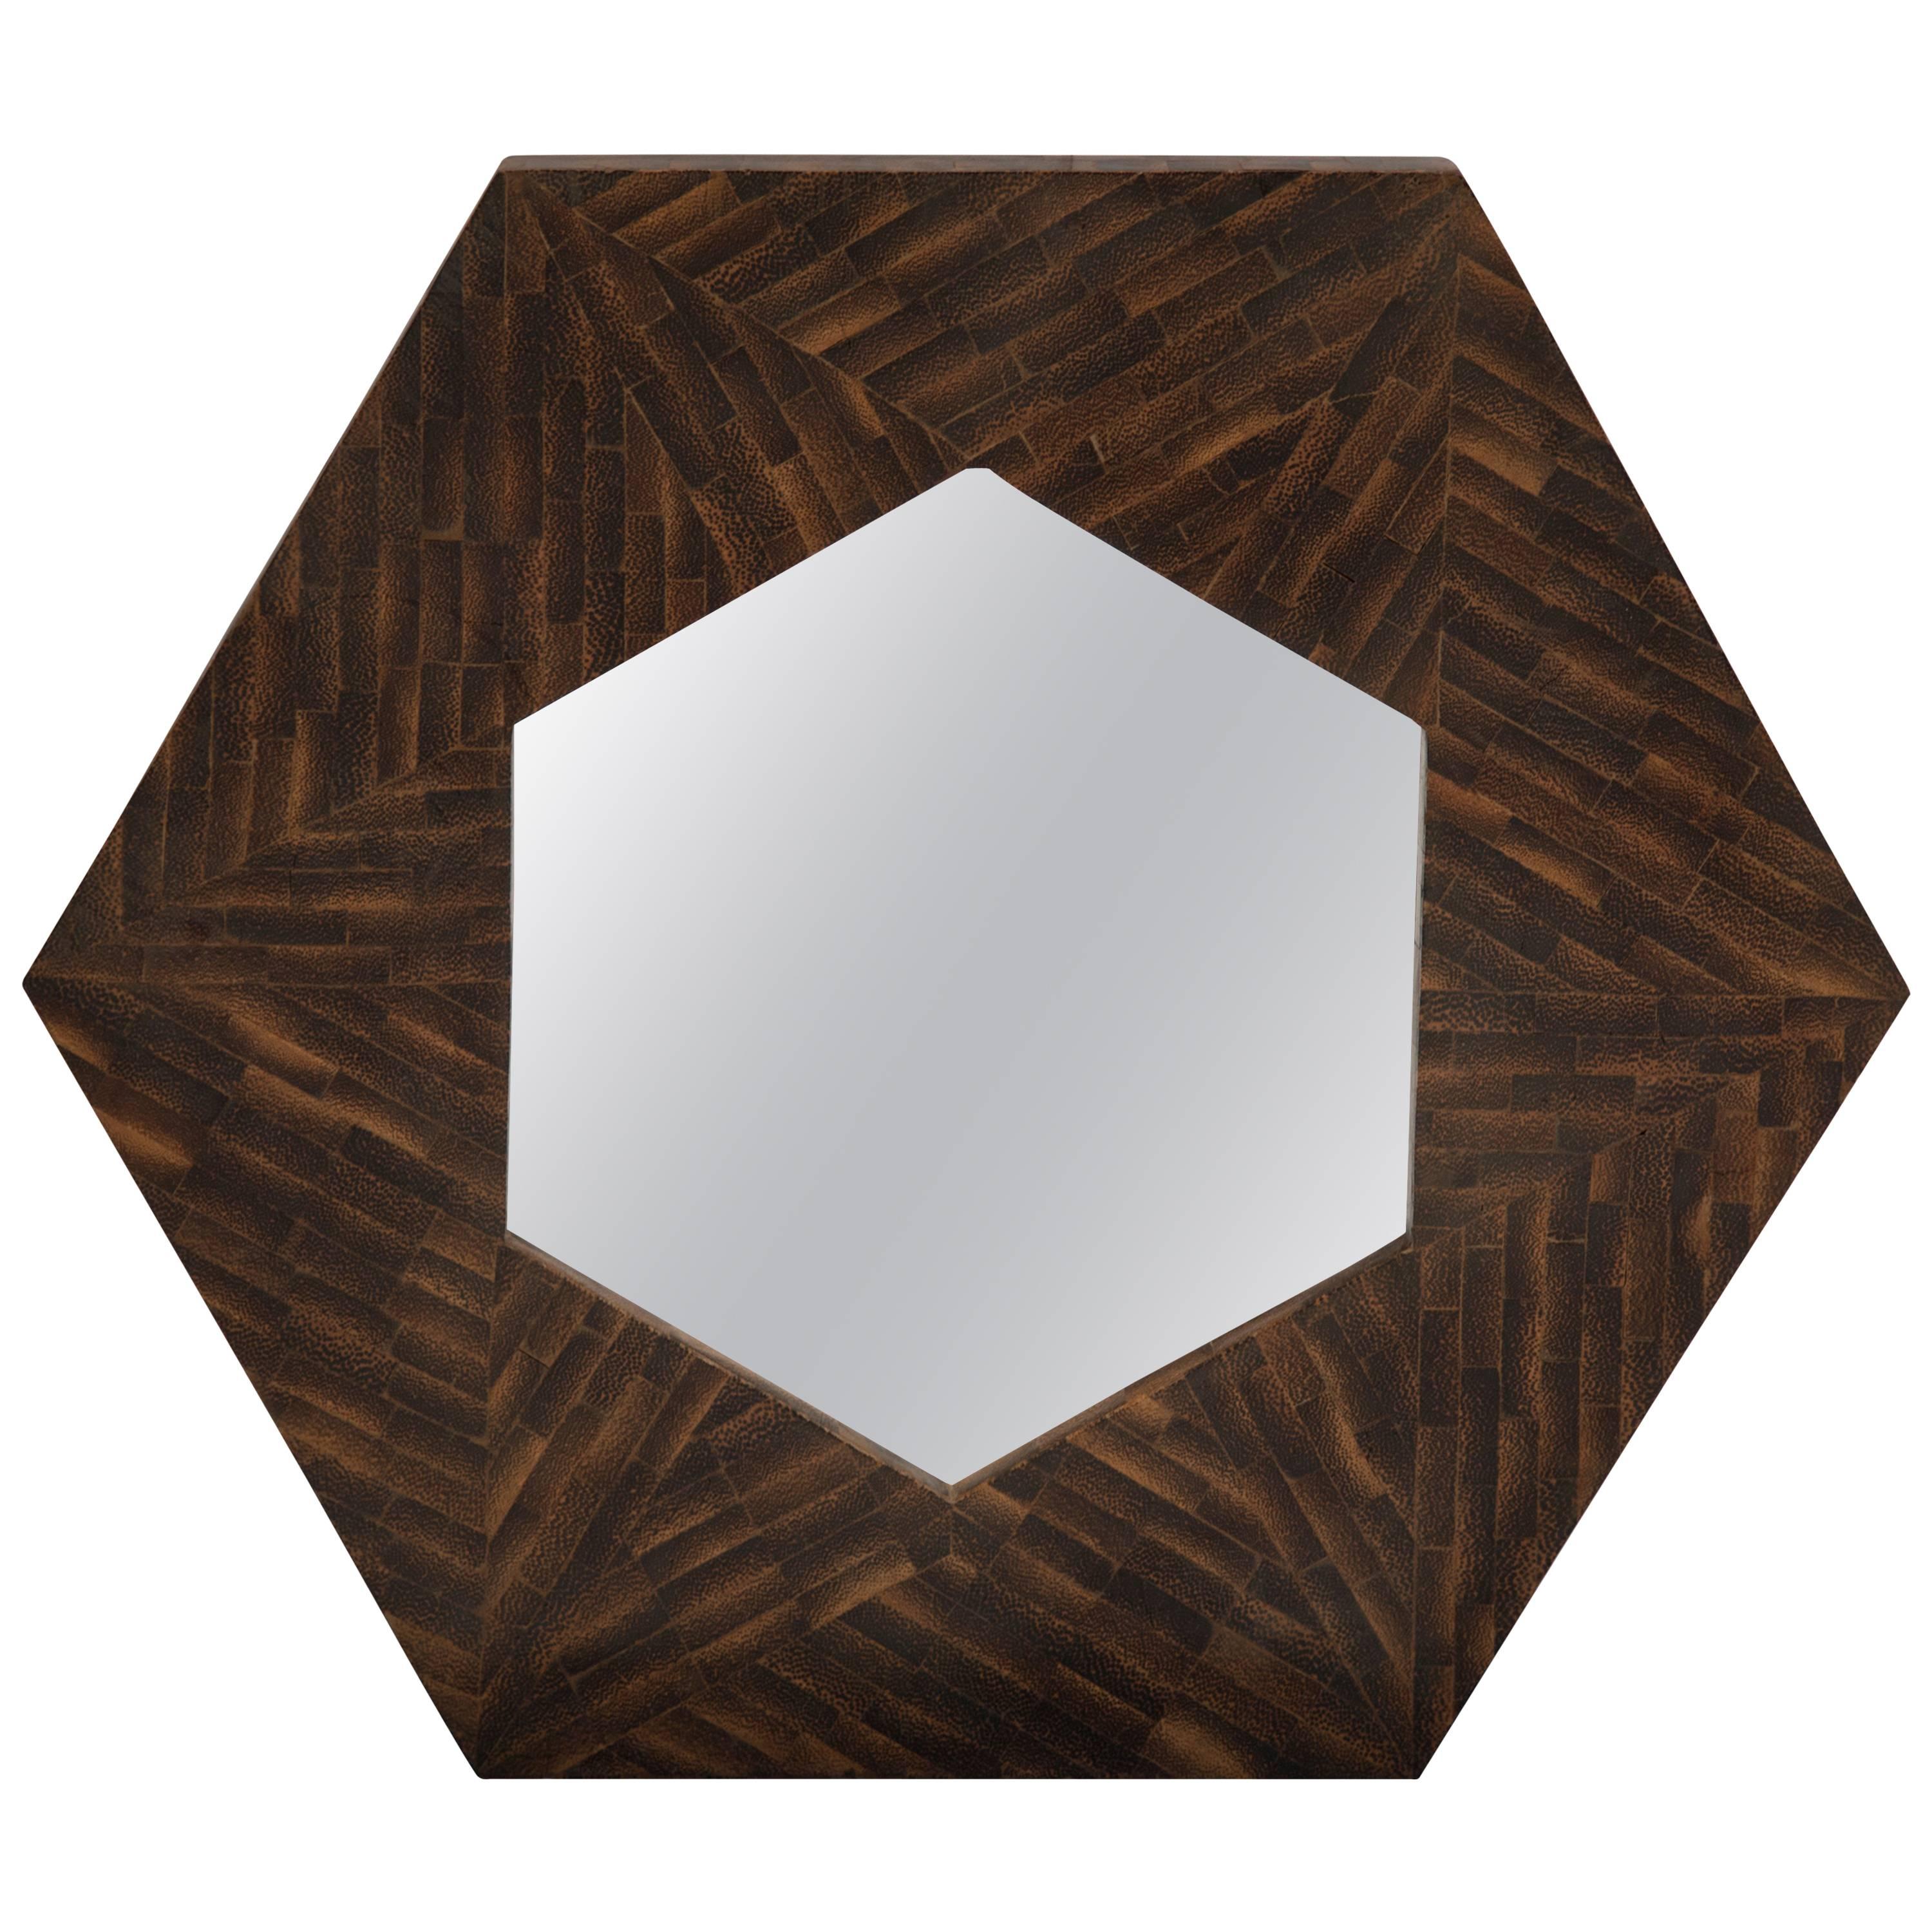 Unknown artist of a unique modernist solid rosewood wall mirror with five sides. Pristine mirror center, circa 1950s. Although the artist is unknown, we believe the origin of this piece is from Italy as the trend for octagonal-shaped mirrors during